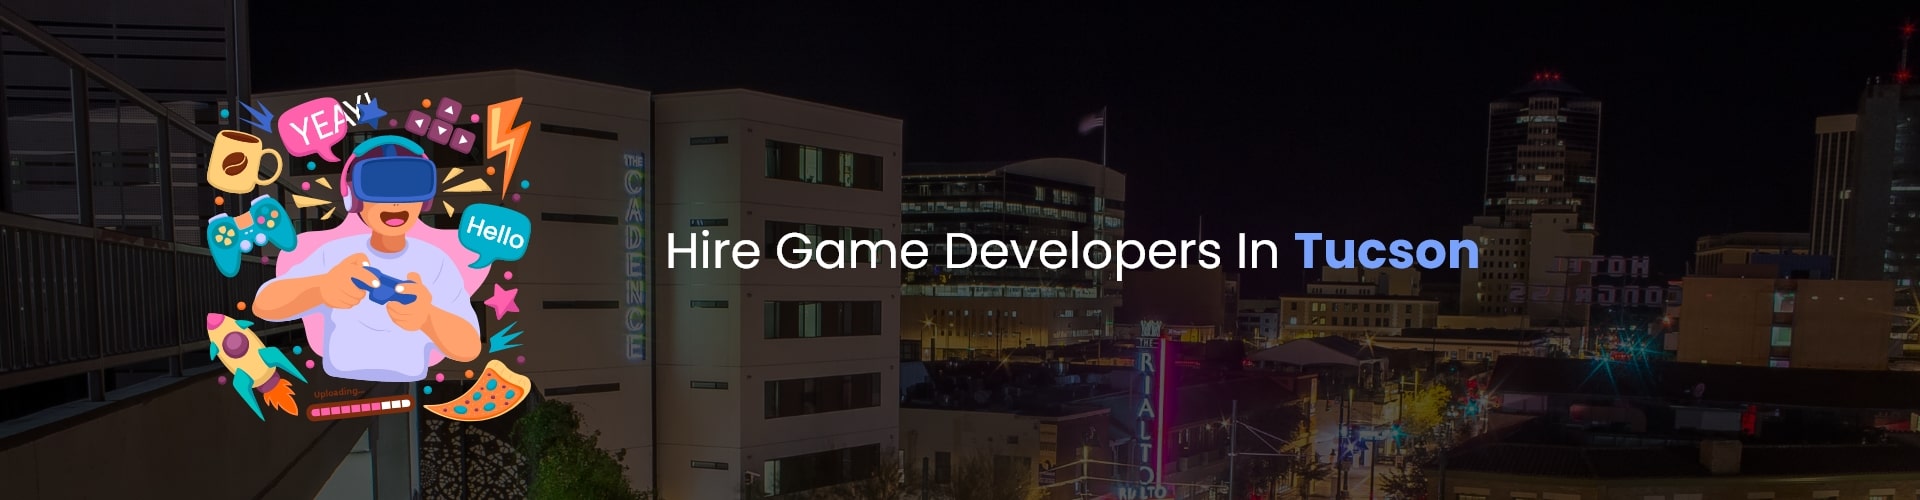 hire game developers in tucson